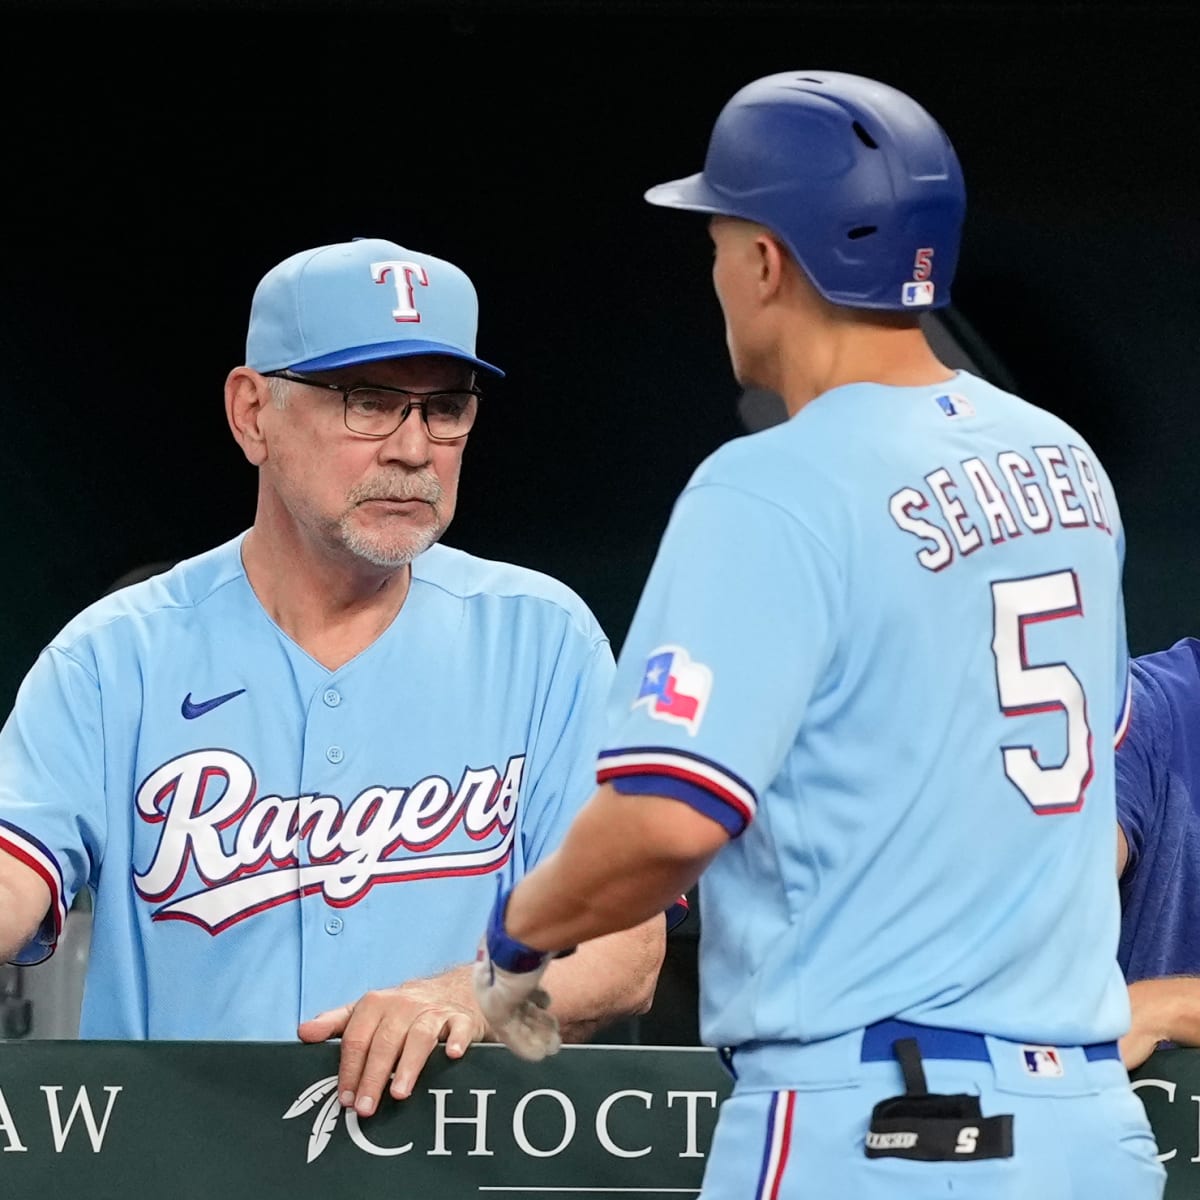 Texas Rangers manager Bruce Bochy leads the Rangers to a sweep of the  Phillies